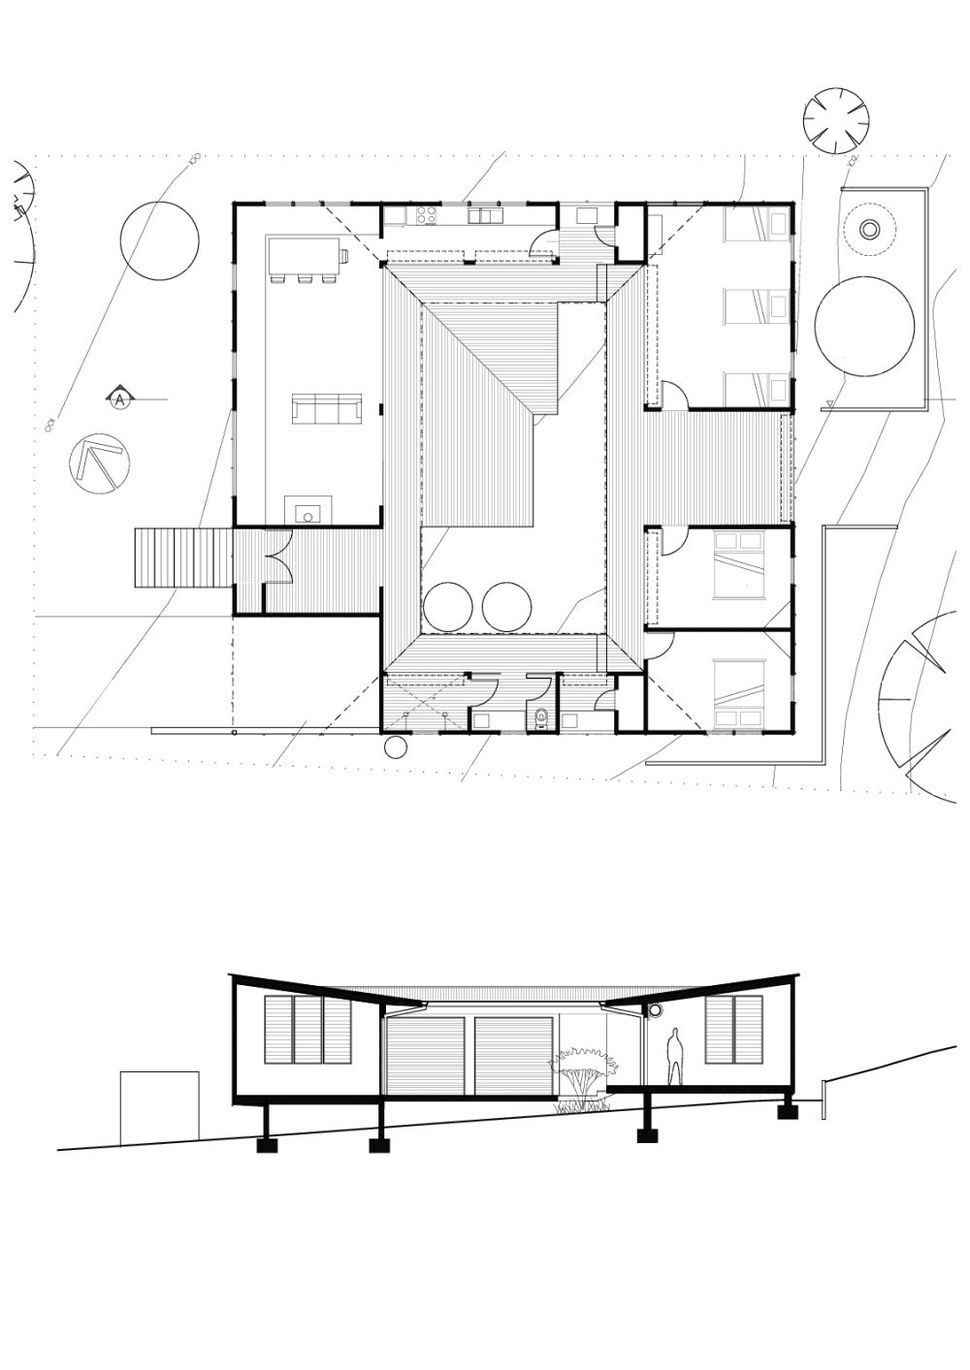 Large size of interior courtyard house plans with courtyards includes  floor plan samples design australia spanish